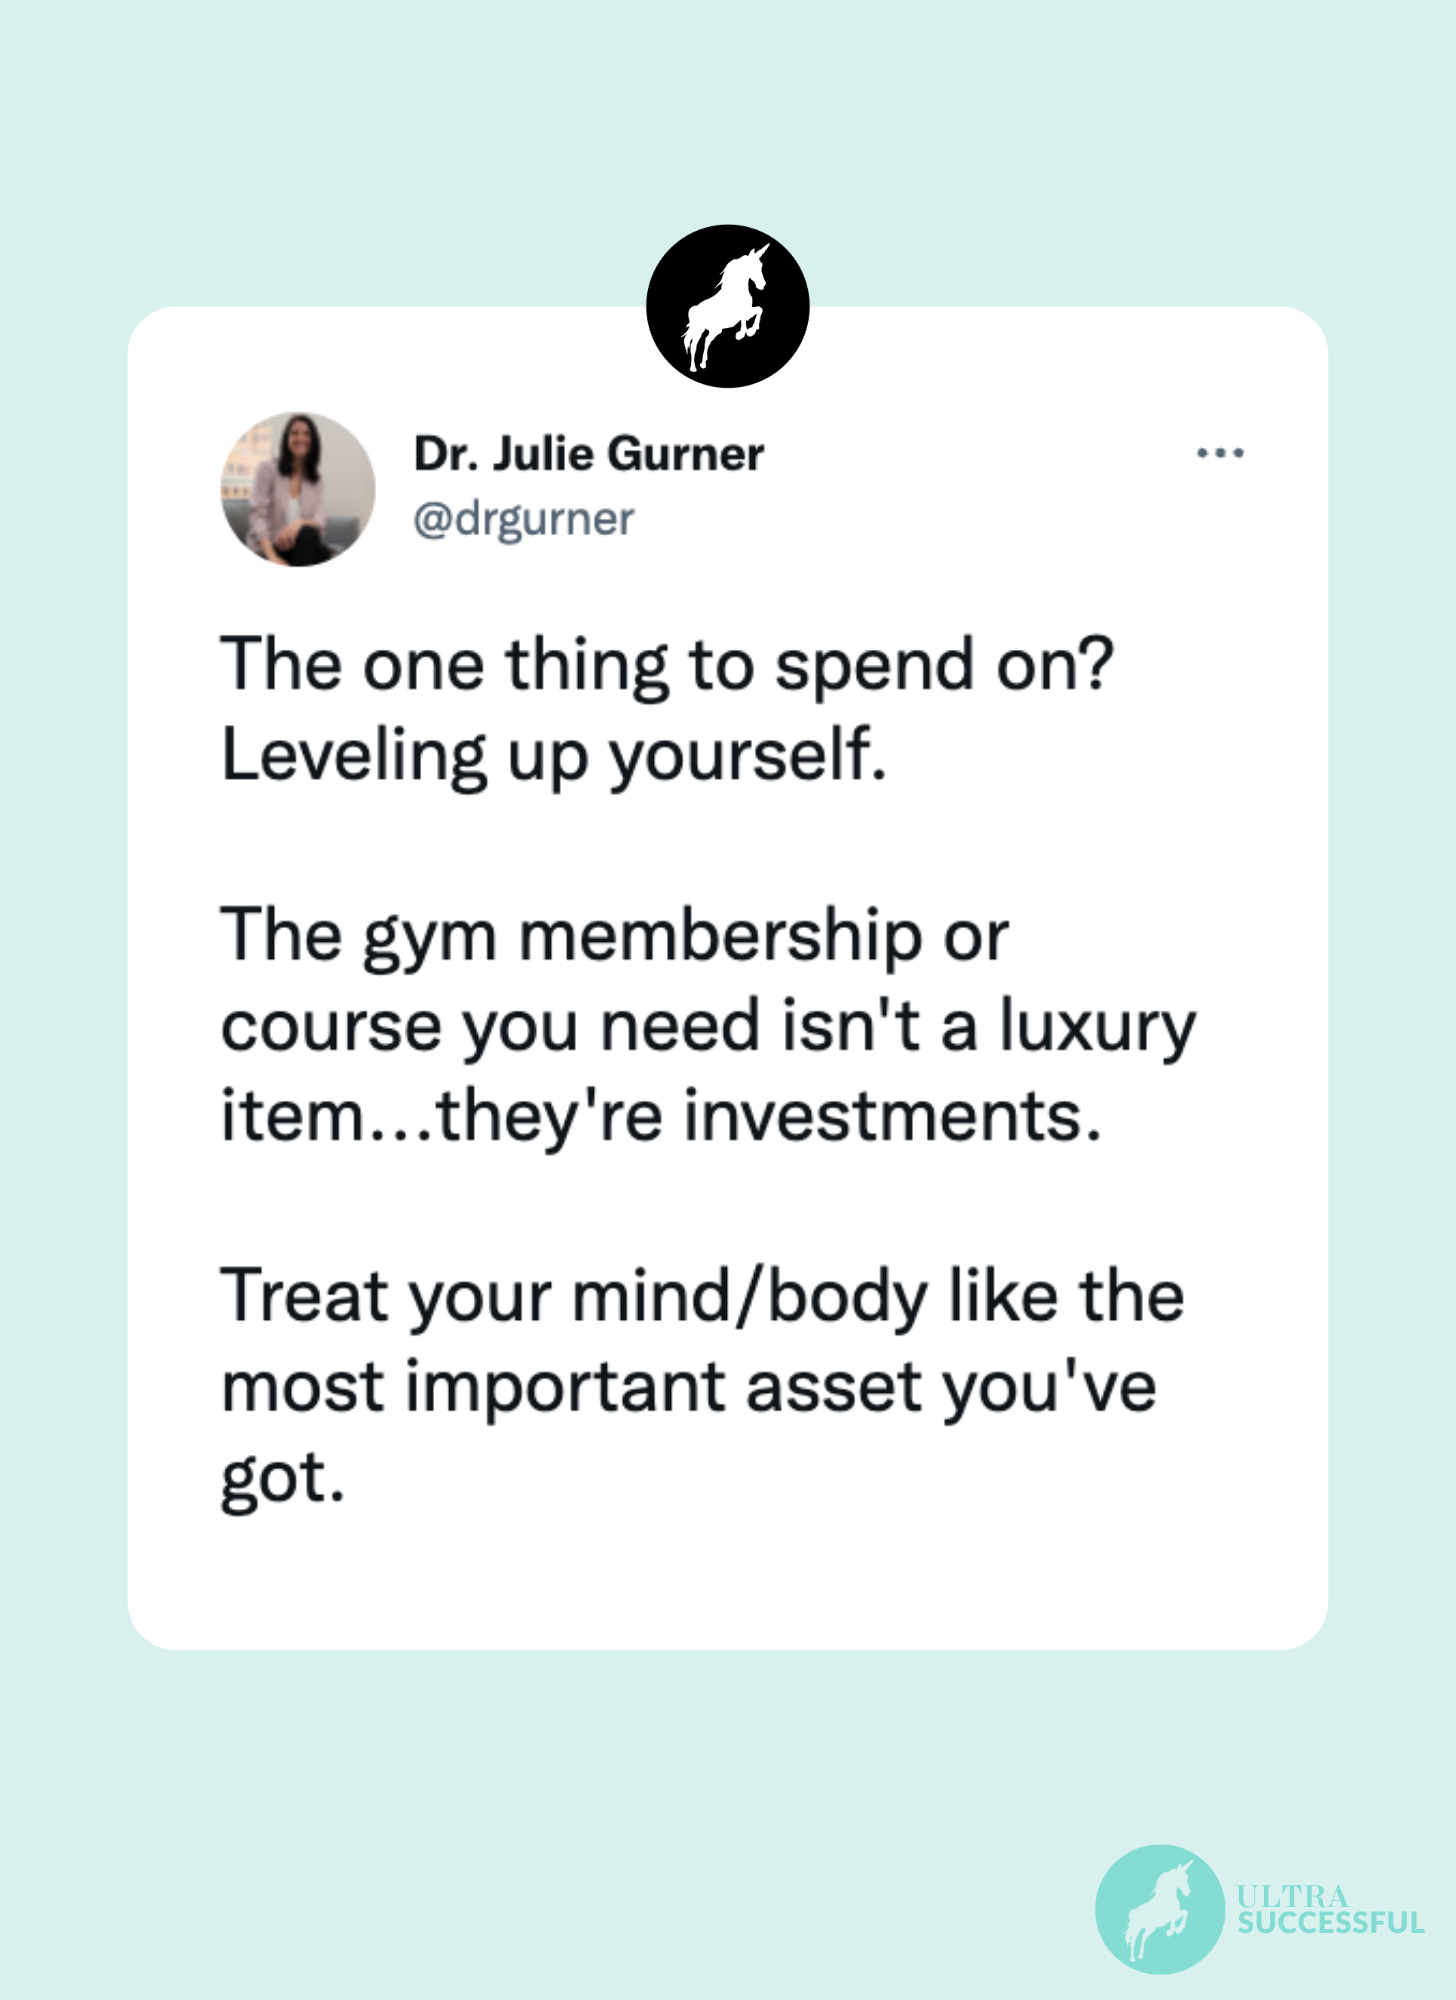 @drgurner: The one thing to spend on? Leveling up yourself.  The gym membership or course you need isn't a luxury item...they're investments.   Treat your mind/body like the most important asset you've got.